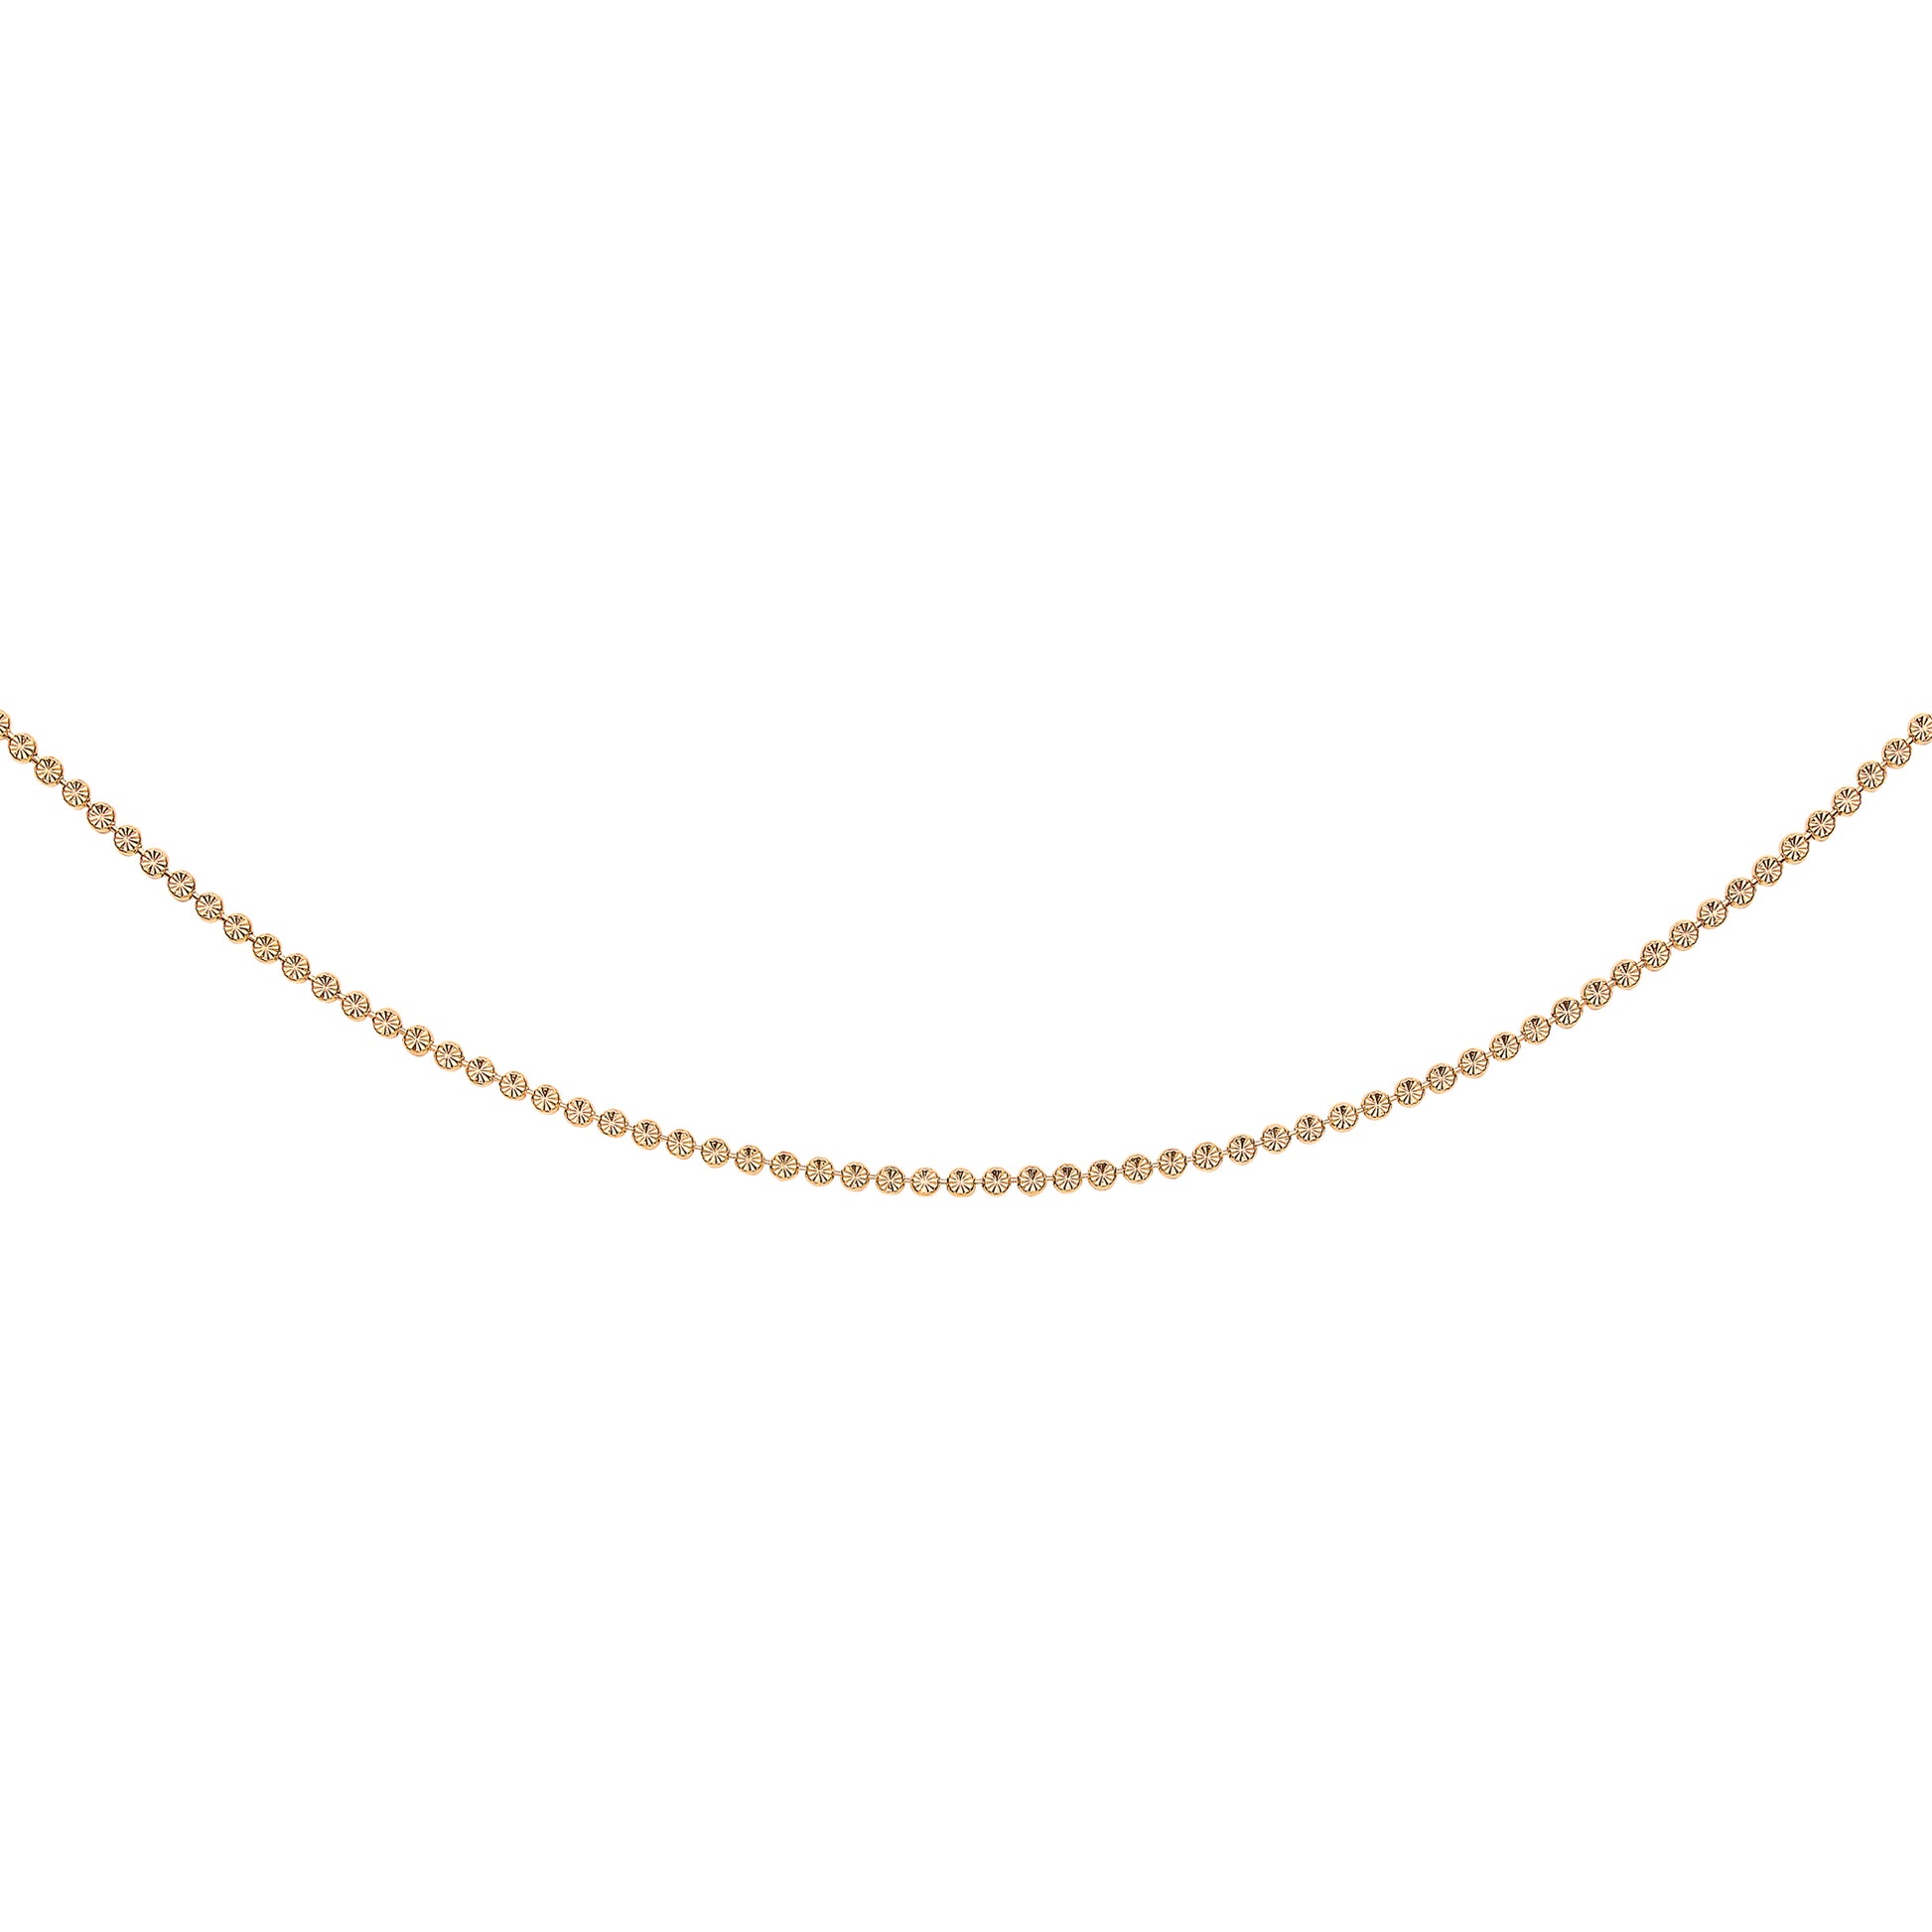 Gilded Silver  Flat Bead Necklace 3mm 18" + 2" Extension - CH-DC03